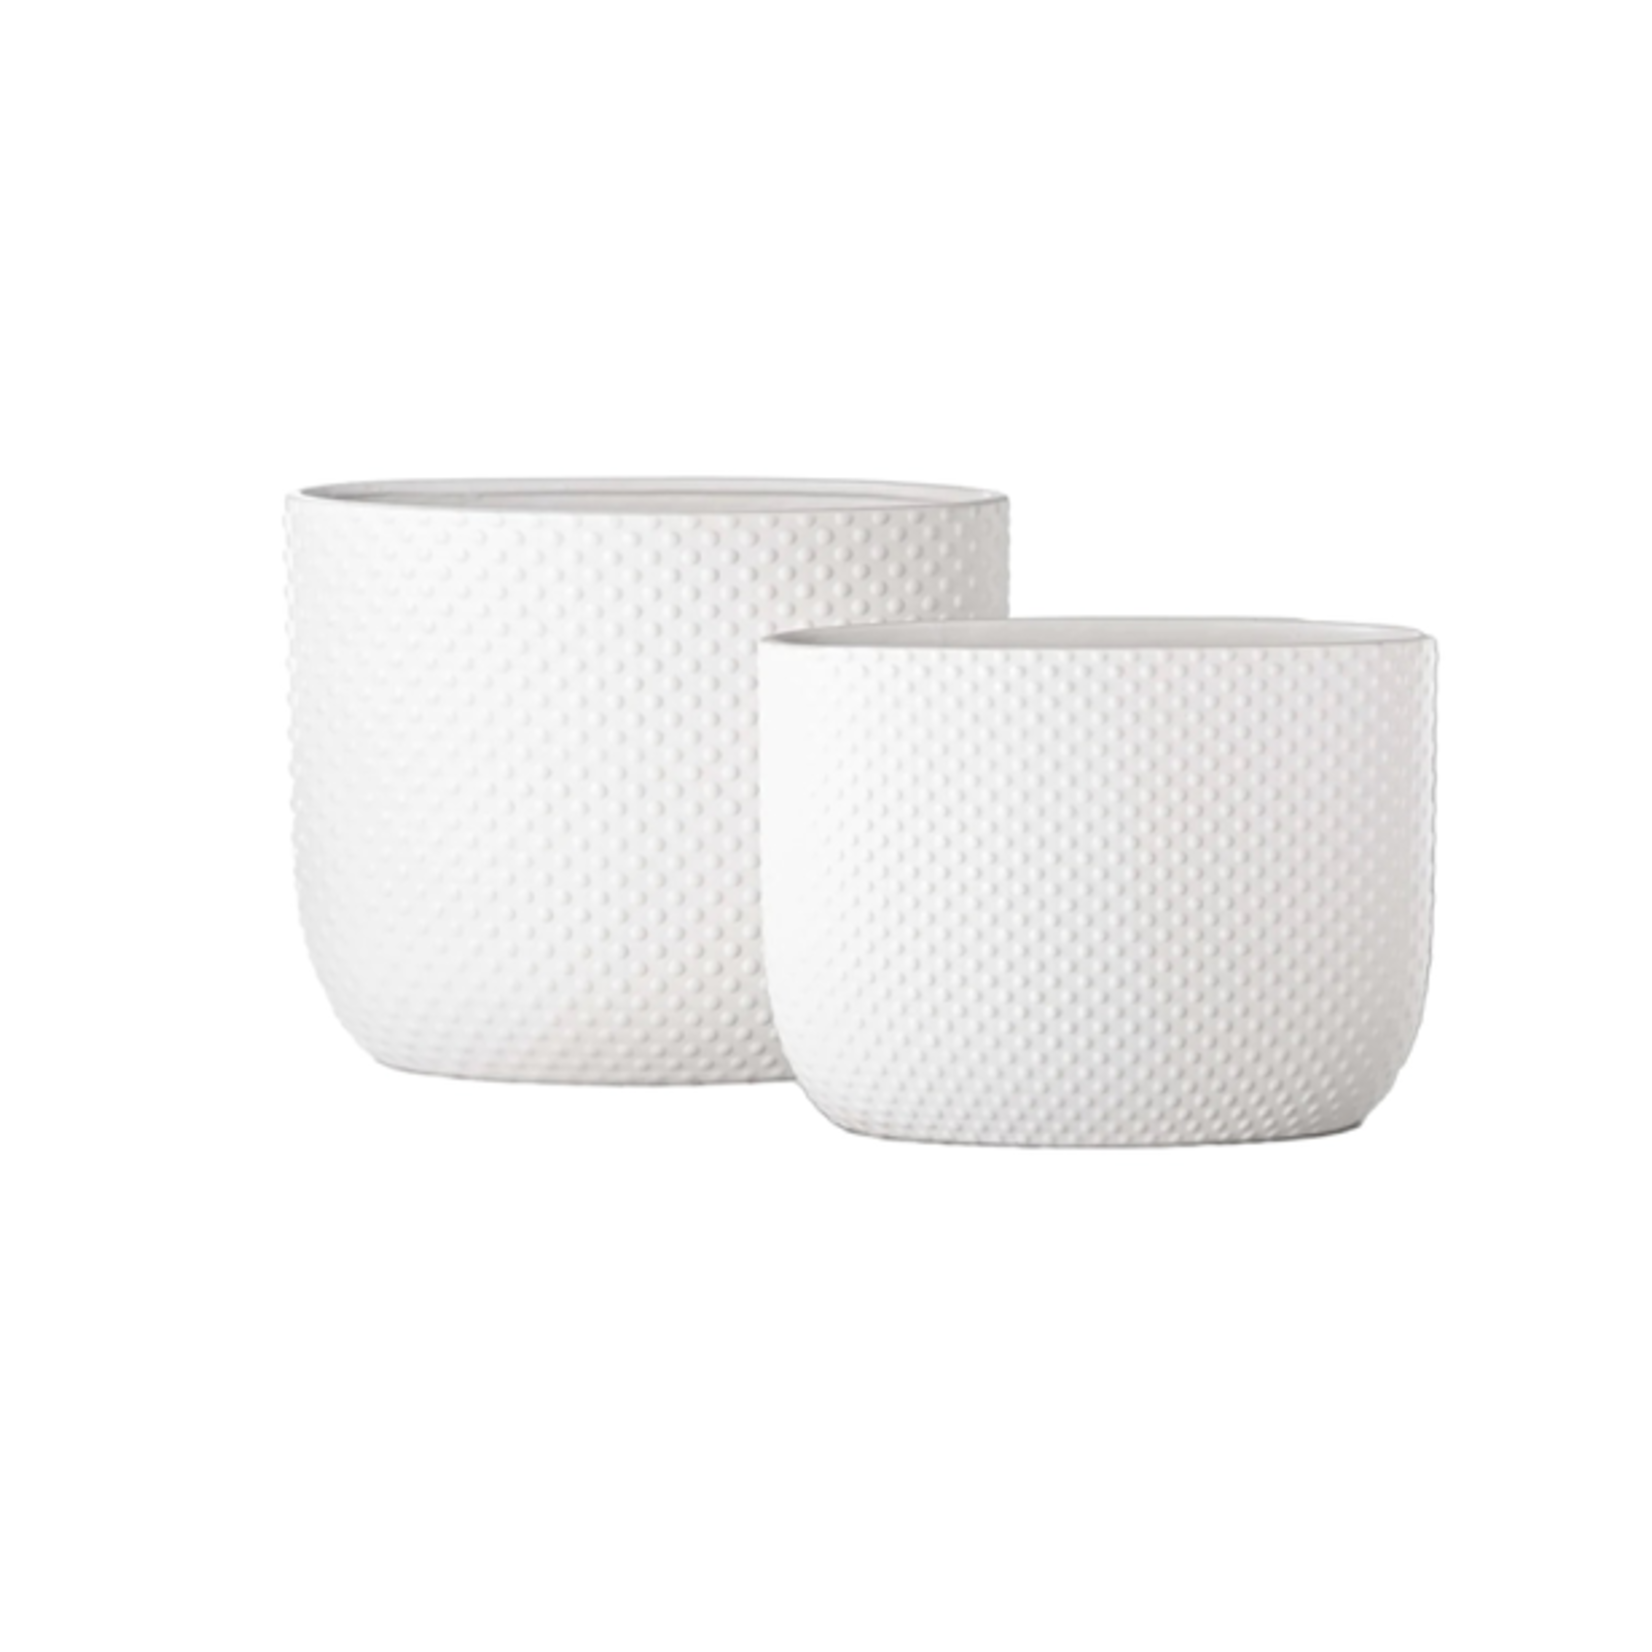 9.5”H X 12.5”L X 5”W SMALL MATTE WHITE CERAMIC TALL OVAL EMBOSSED DOTTED